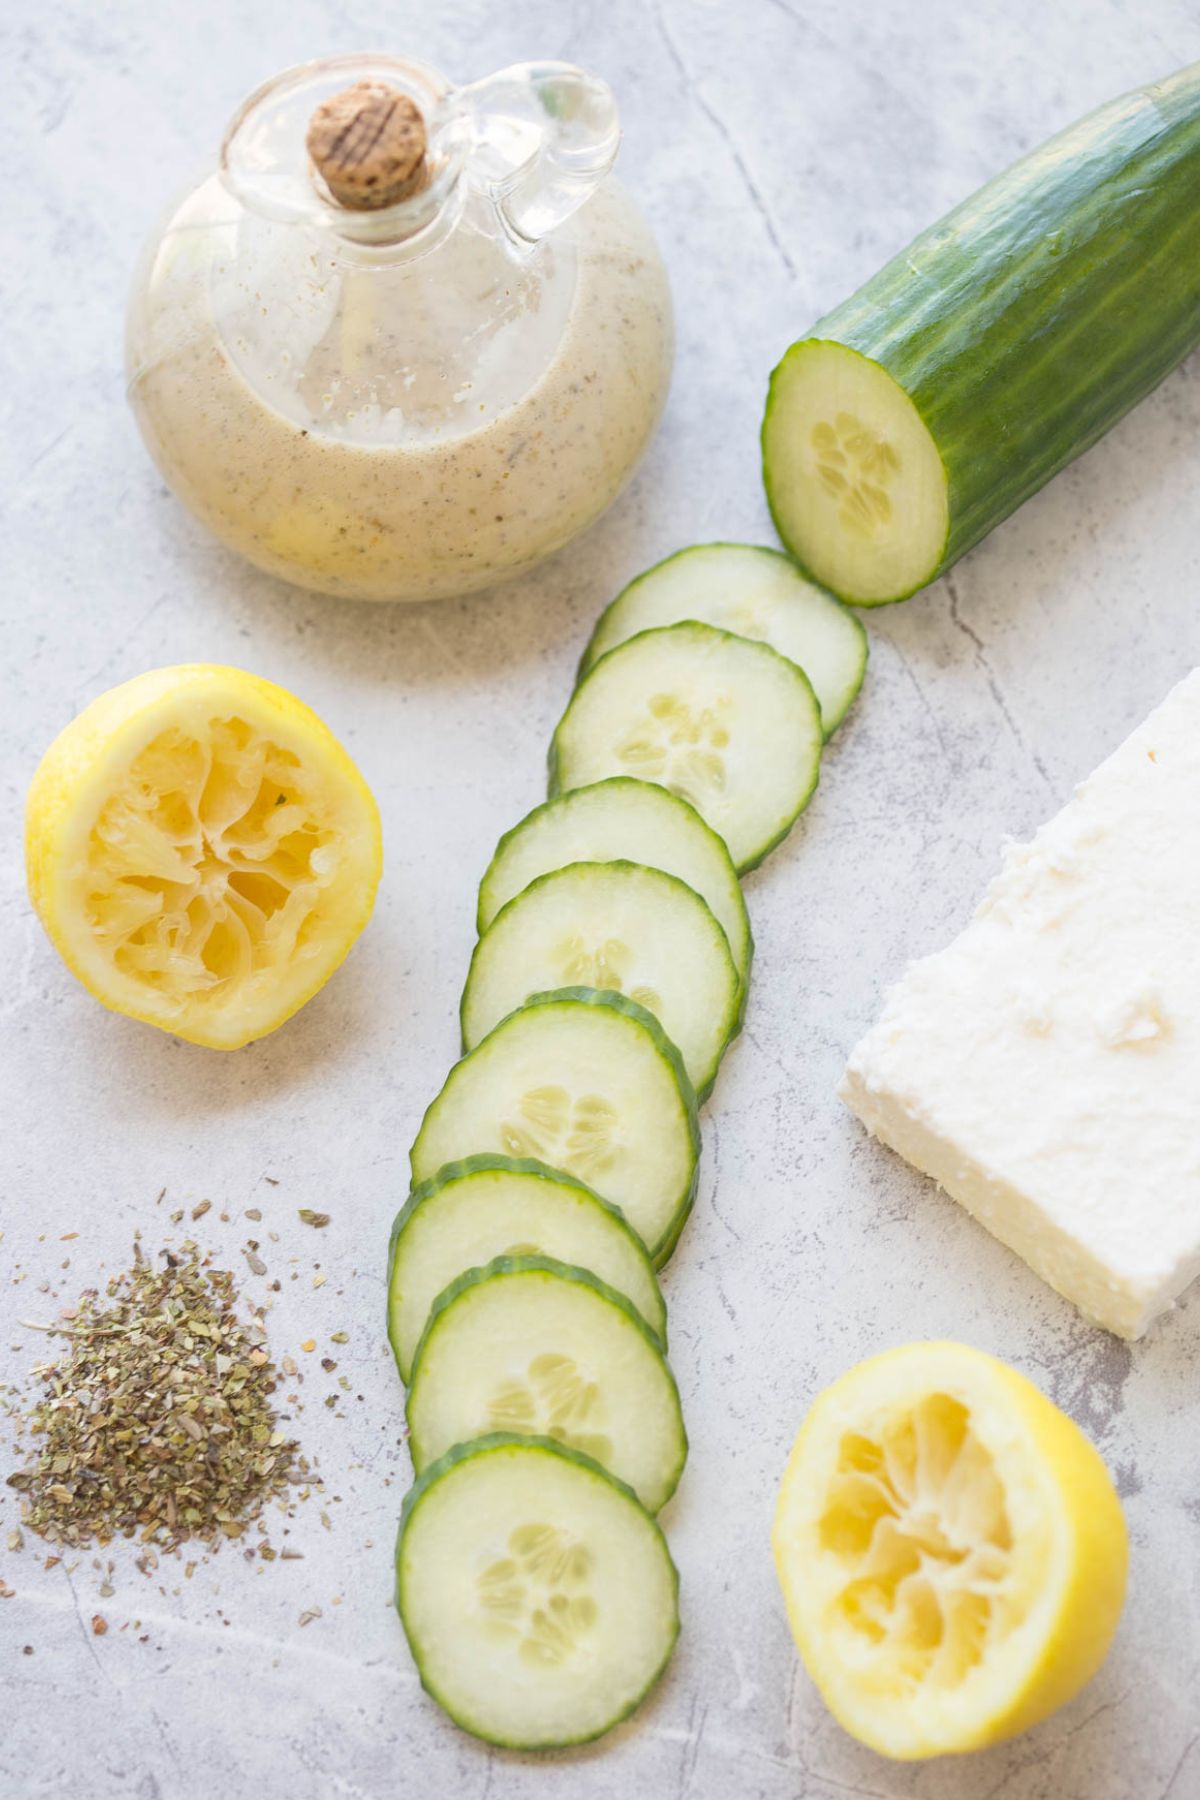 Ingredients for cucumber salad: sliced cucumbers in a line with halved lemons, a fresh garlic bulb, and a block of feta cheese, and a dressing jar.